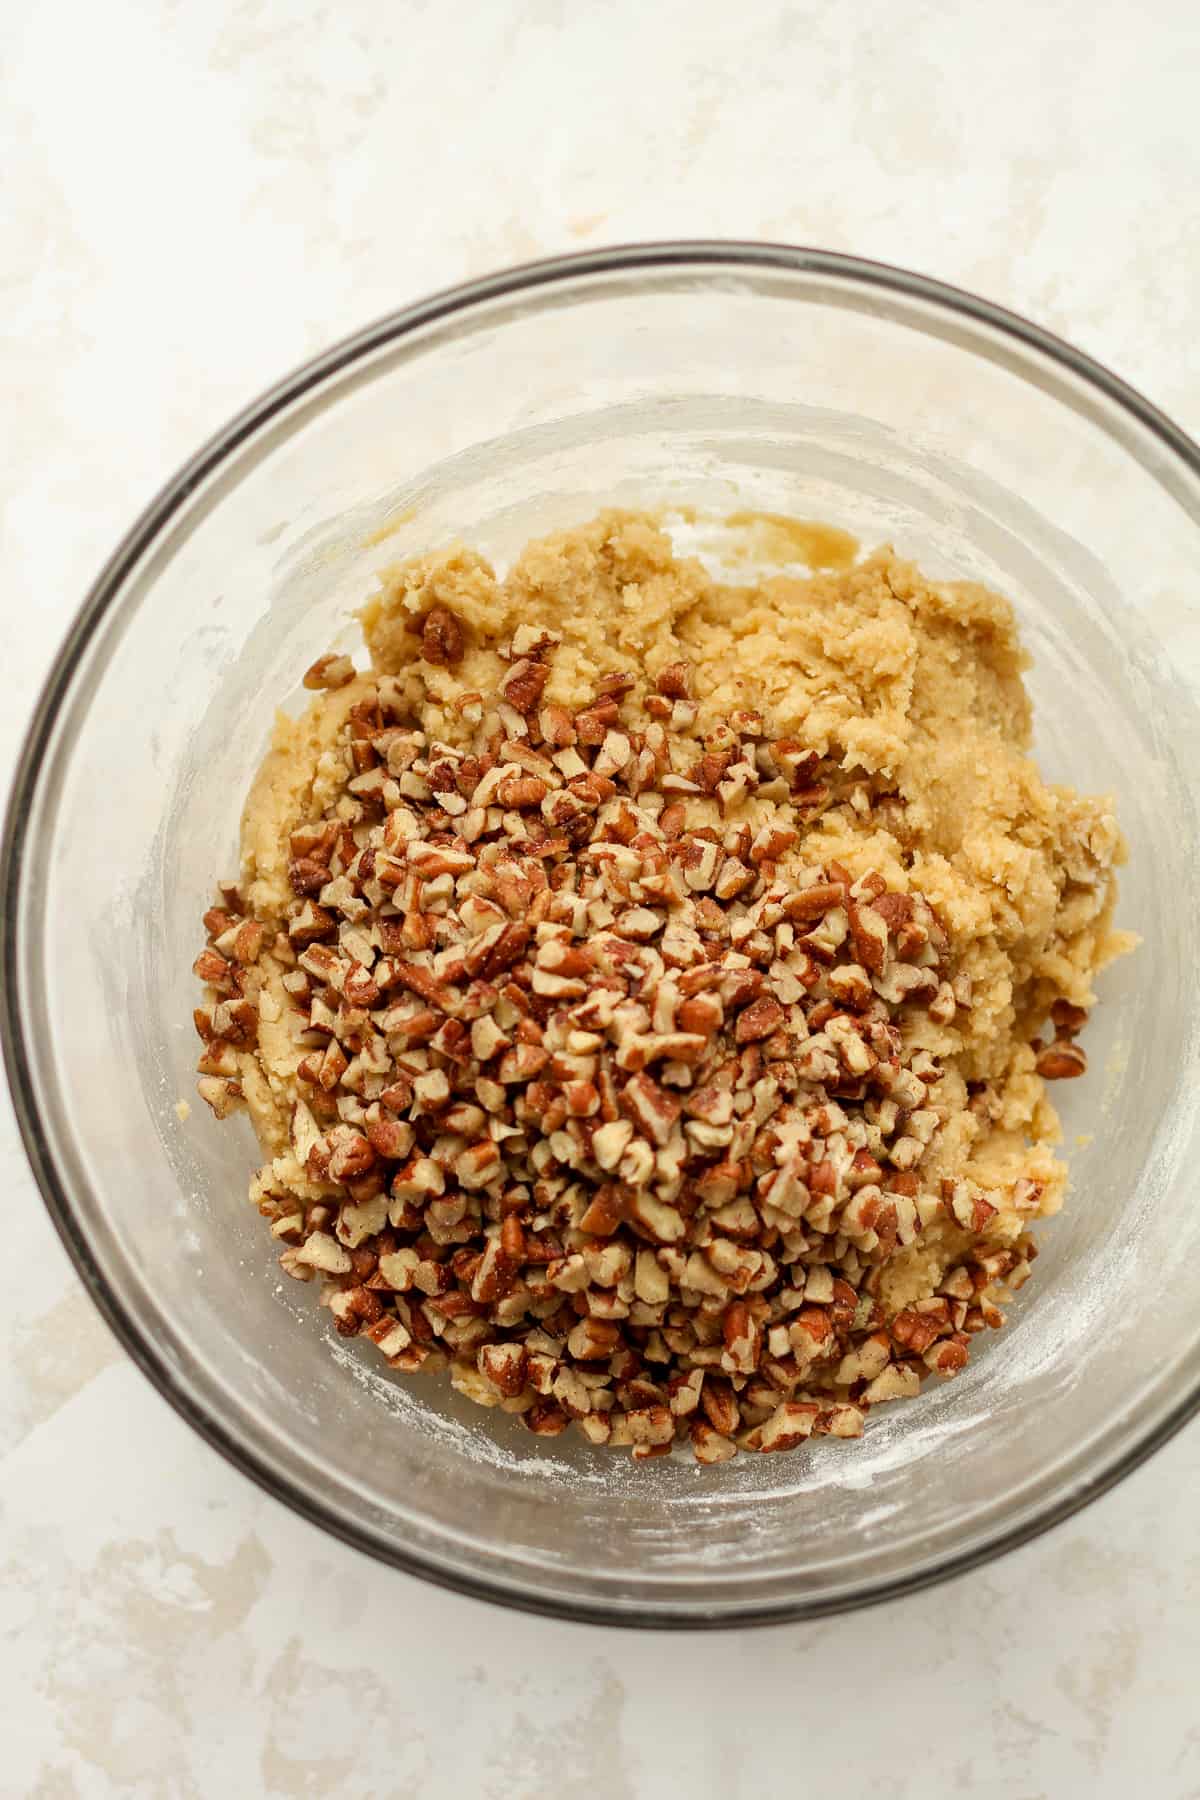 The cookie dough with the chopped pecans on top.